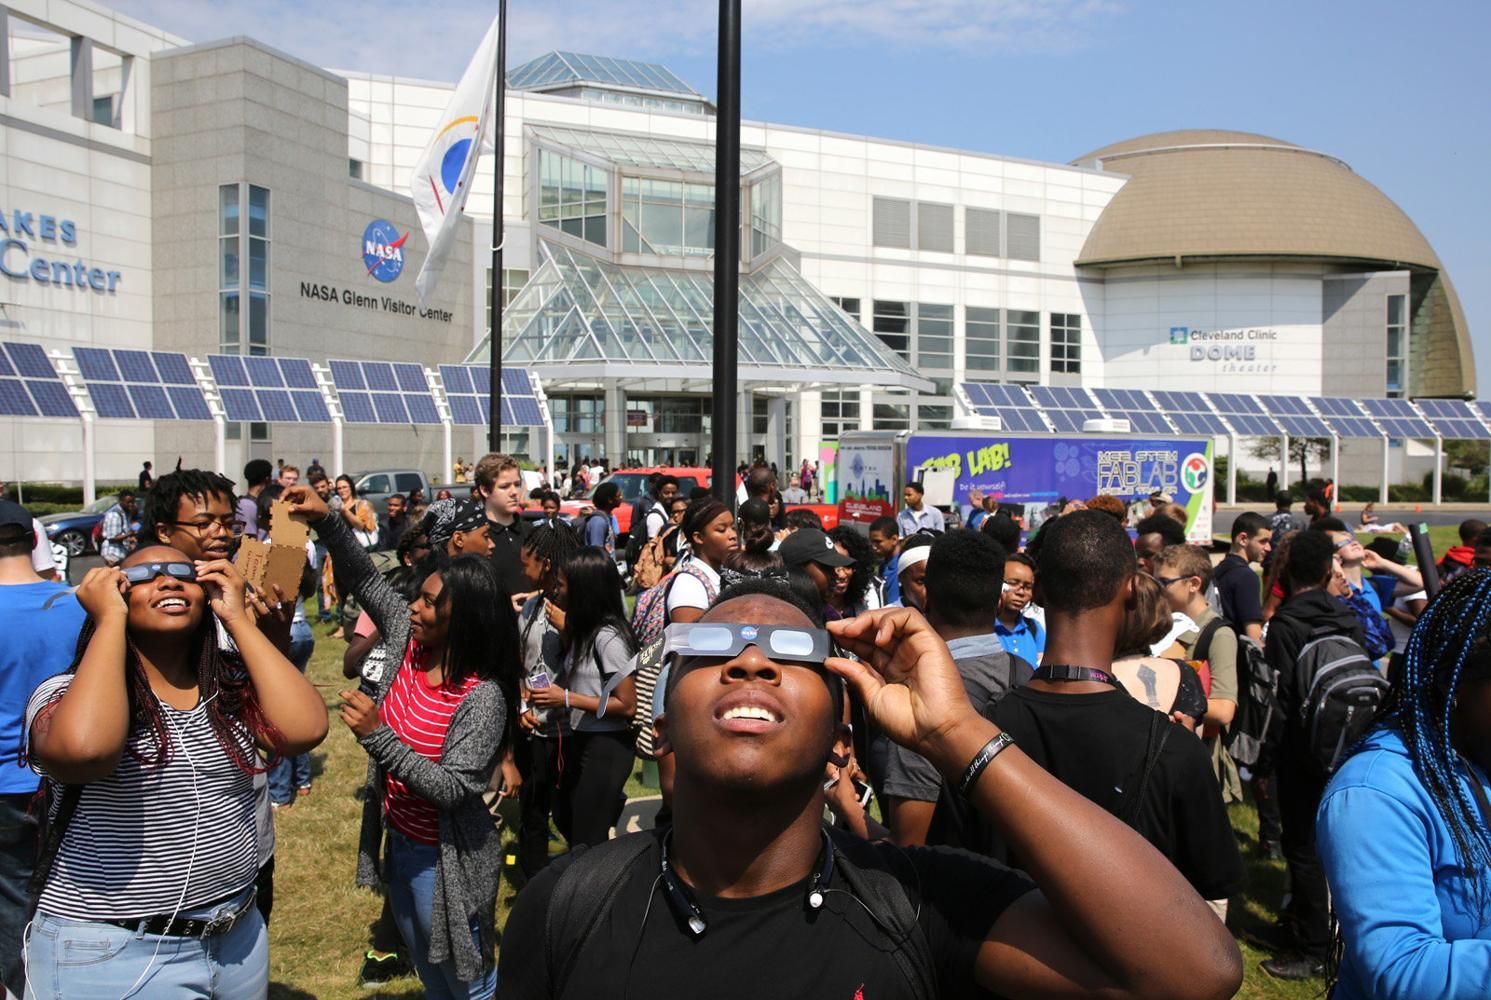 World's largest pair of eclipse glasses: world record in Memphis, Tennessee